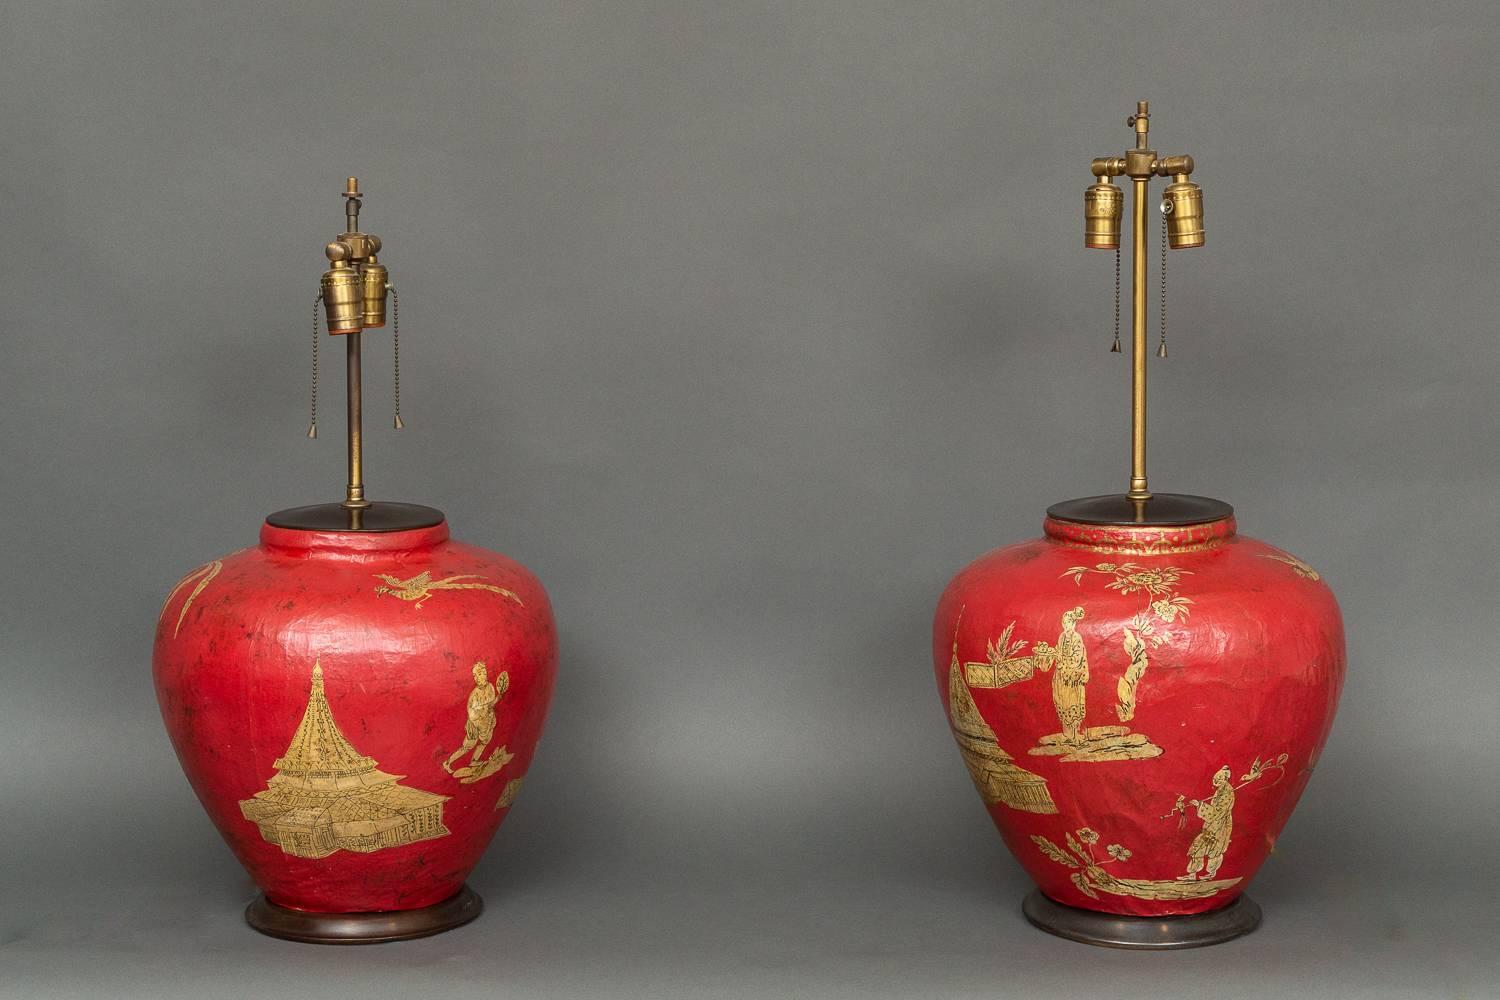 Pair of Handmade Parish Hadley Chinoiserie Decorated Lamps.  Lamps are hand made out of papier-mâché and hand-painted with vignettes in the Chinoiserie style (lamps are a pair but not identical).  Designed by Parish-Hadley, a highly influential